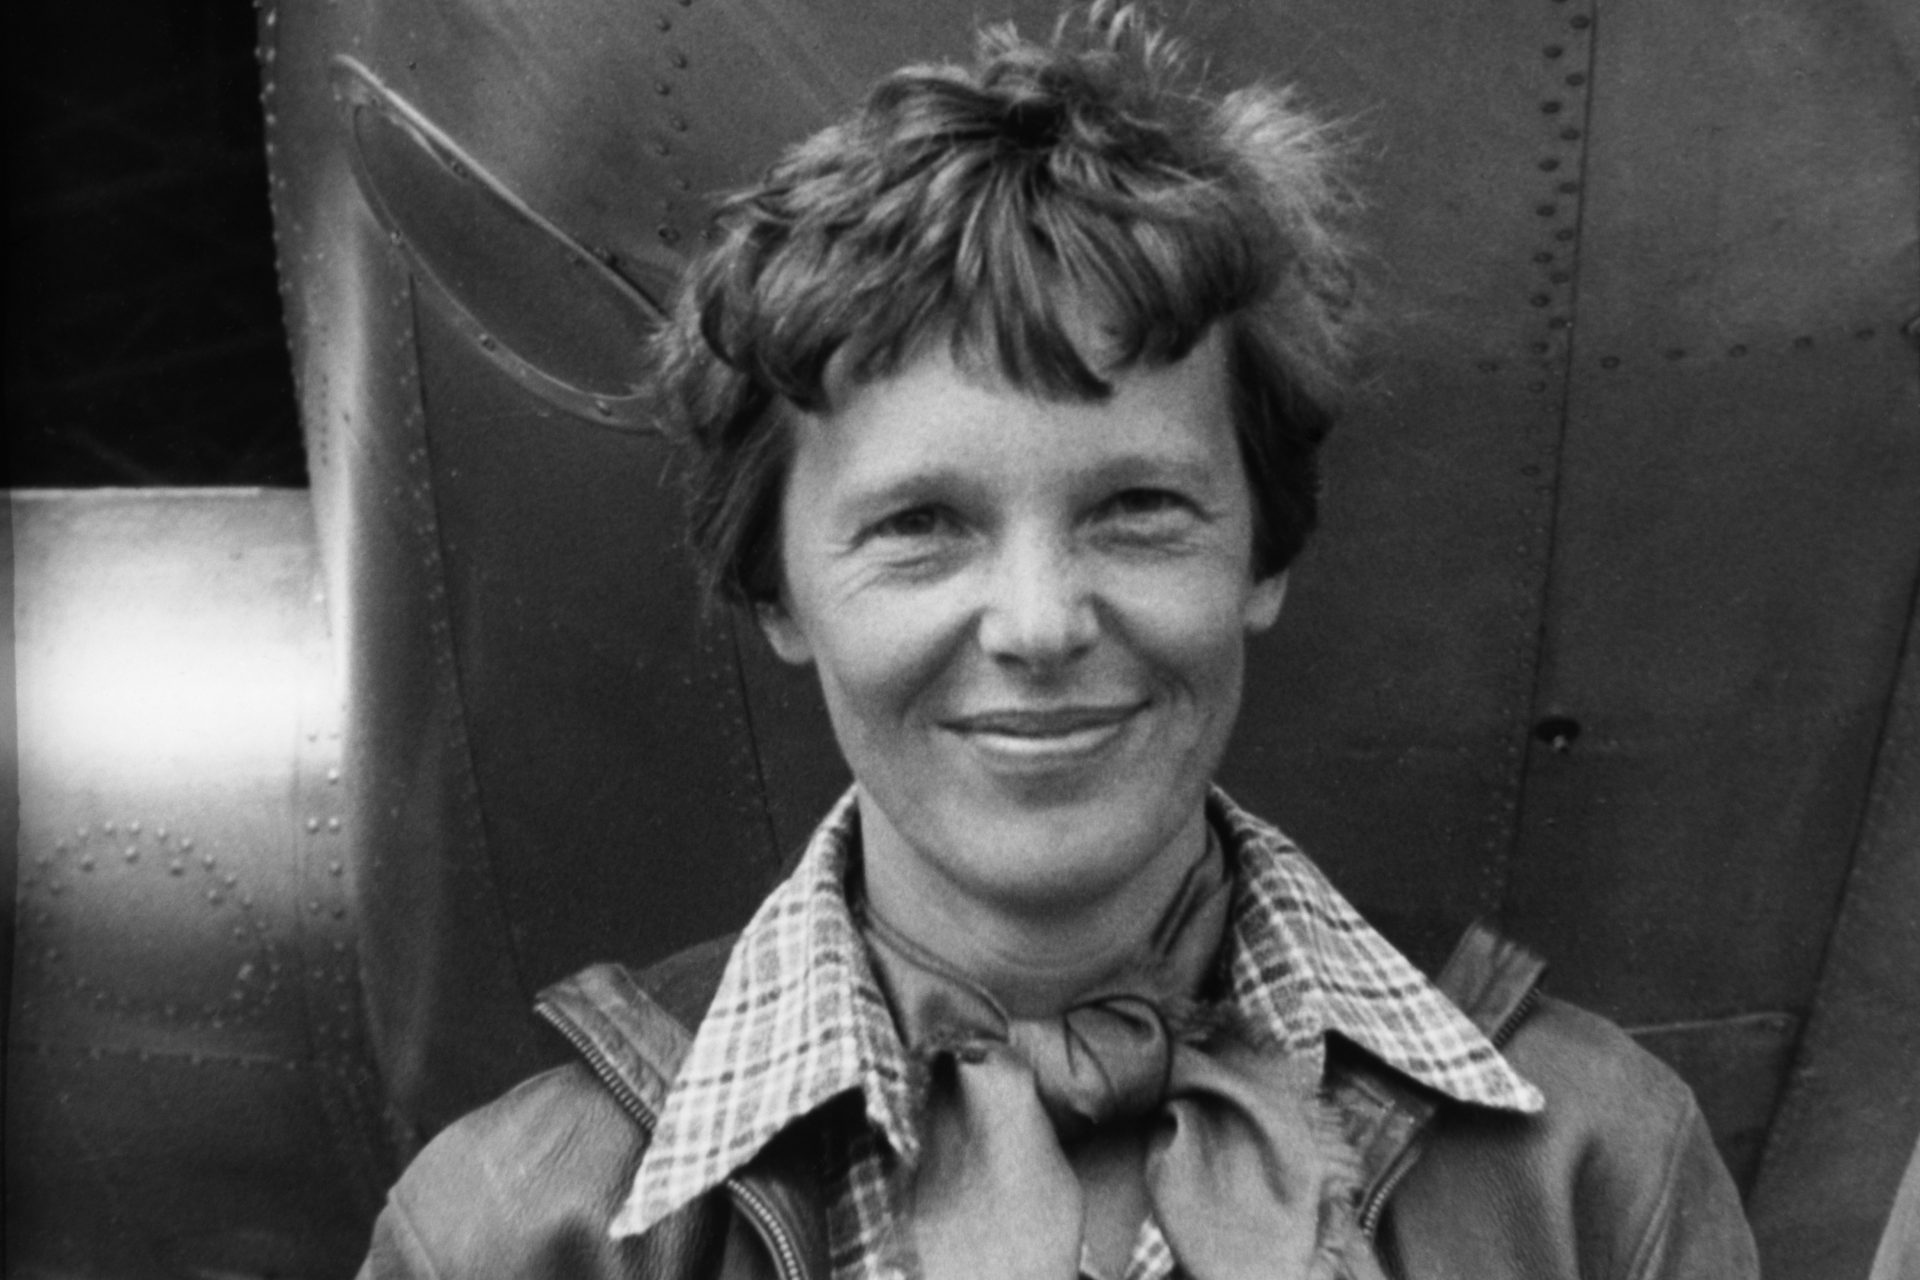 Sonar imagery may solve the disappearance of Amelia Earhart